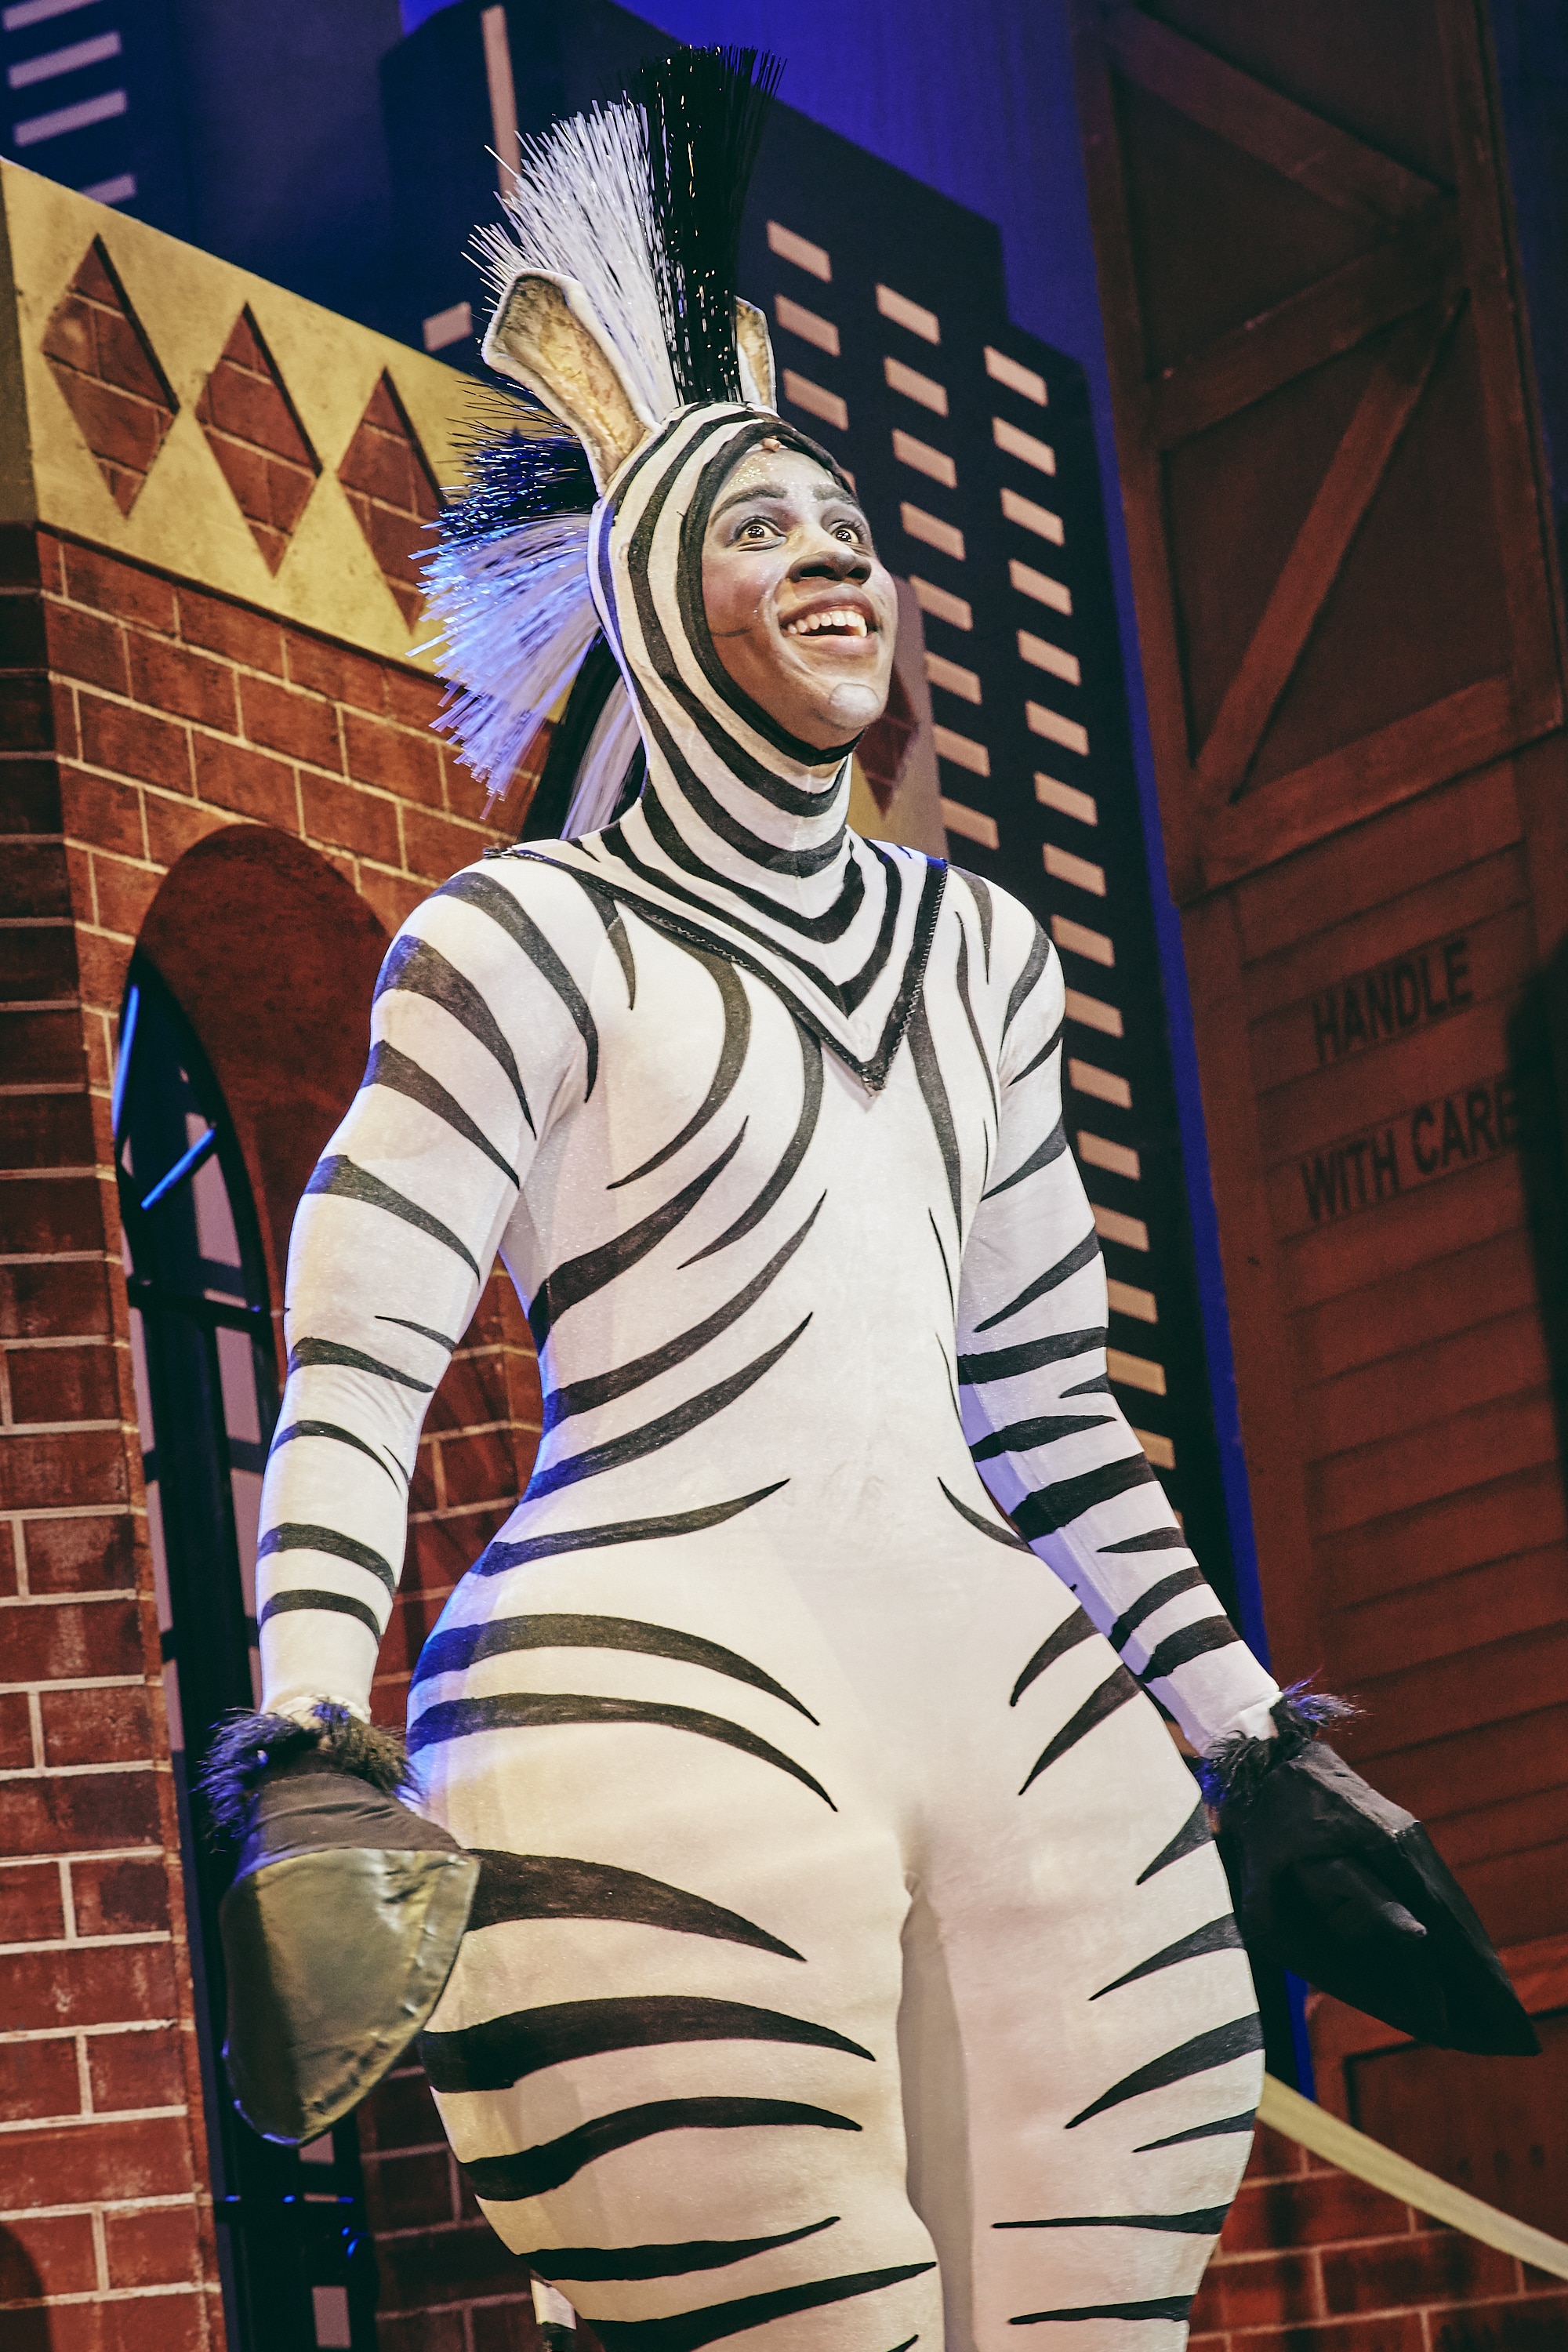 Marty the Zebra looking up smiling